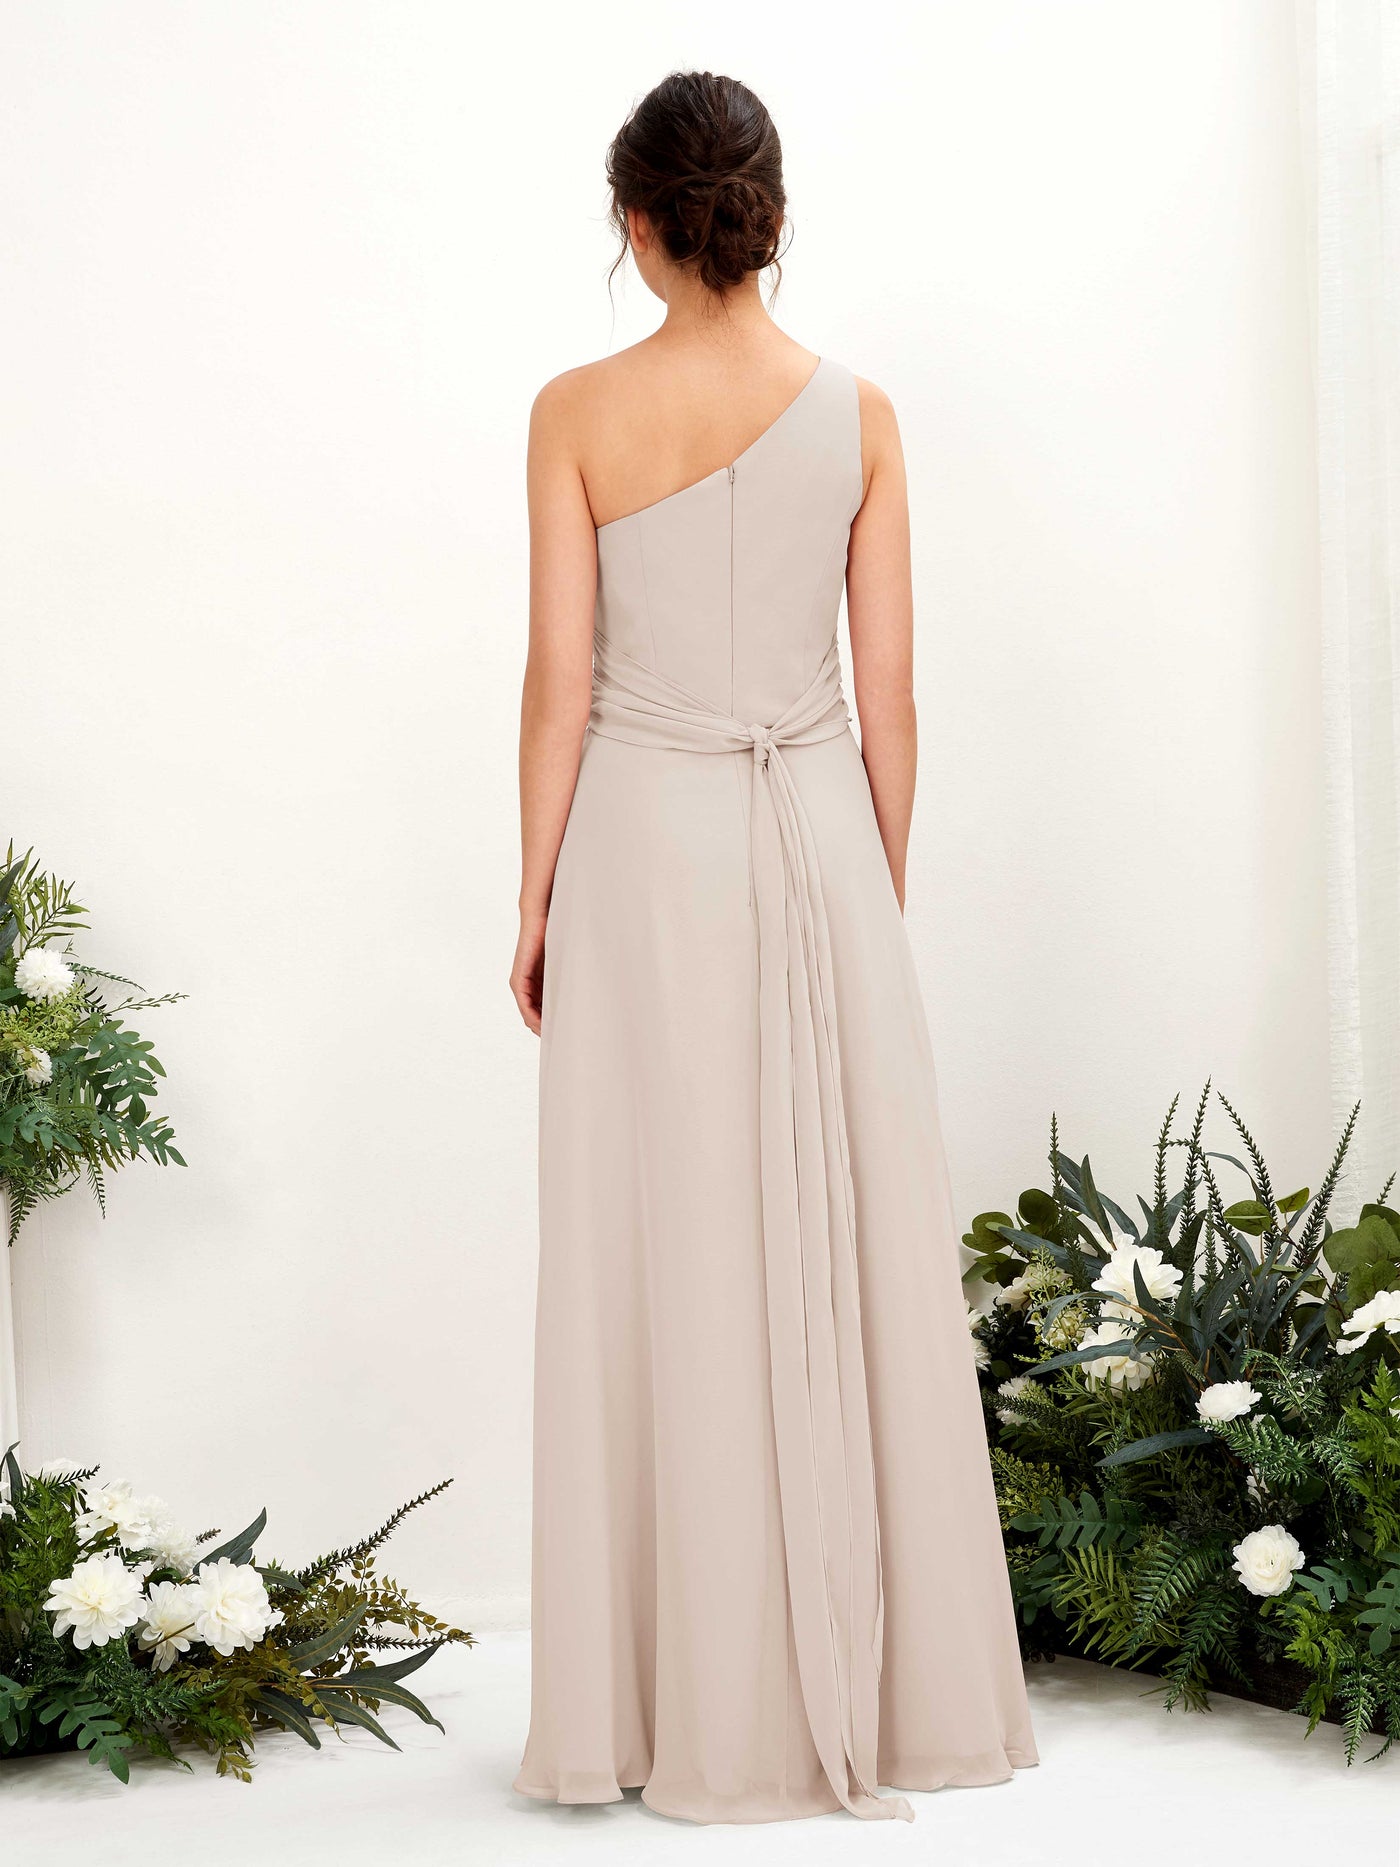 Champagne Bridesmaid Dresses Bridesmaid Dress A-line Chiffon One Shoulder Full Length Sleeveless Wedding Party Dress (81224716)#color_champagne